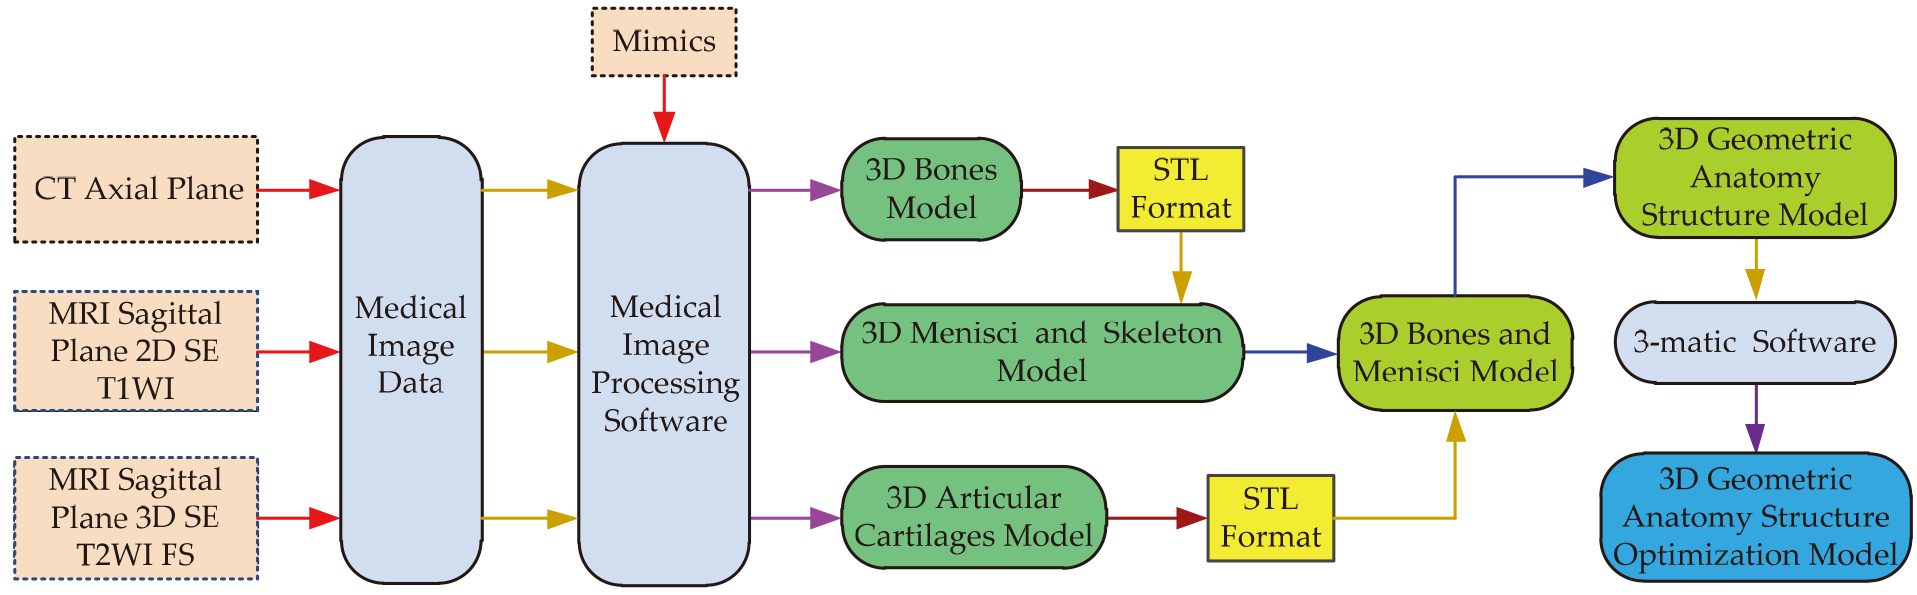 The framework of a 3D modeling methodology based on CT and two sets of different MRI sequences images.